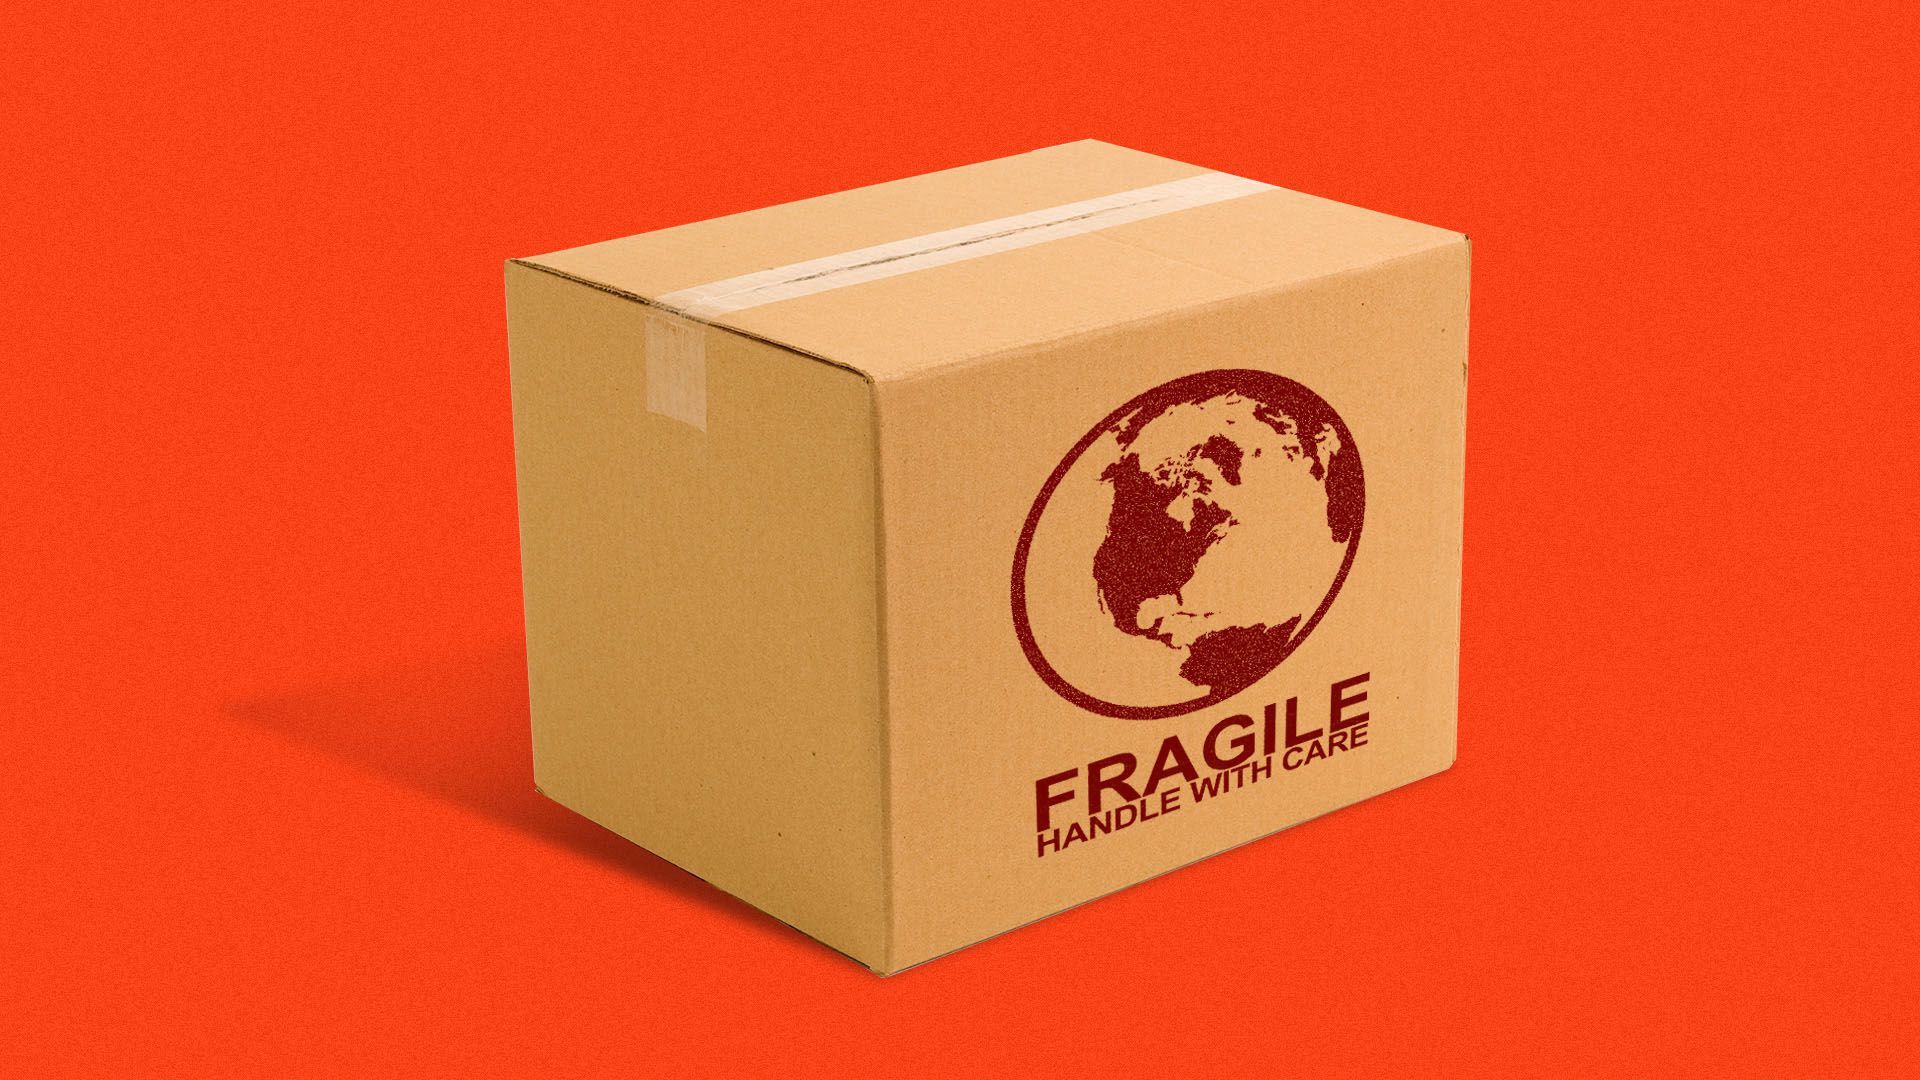 An illustration of a box labeled fragile in front of a red background.